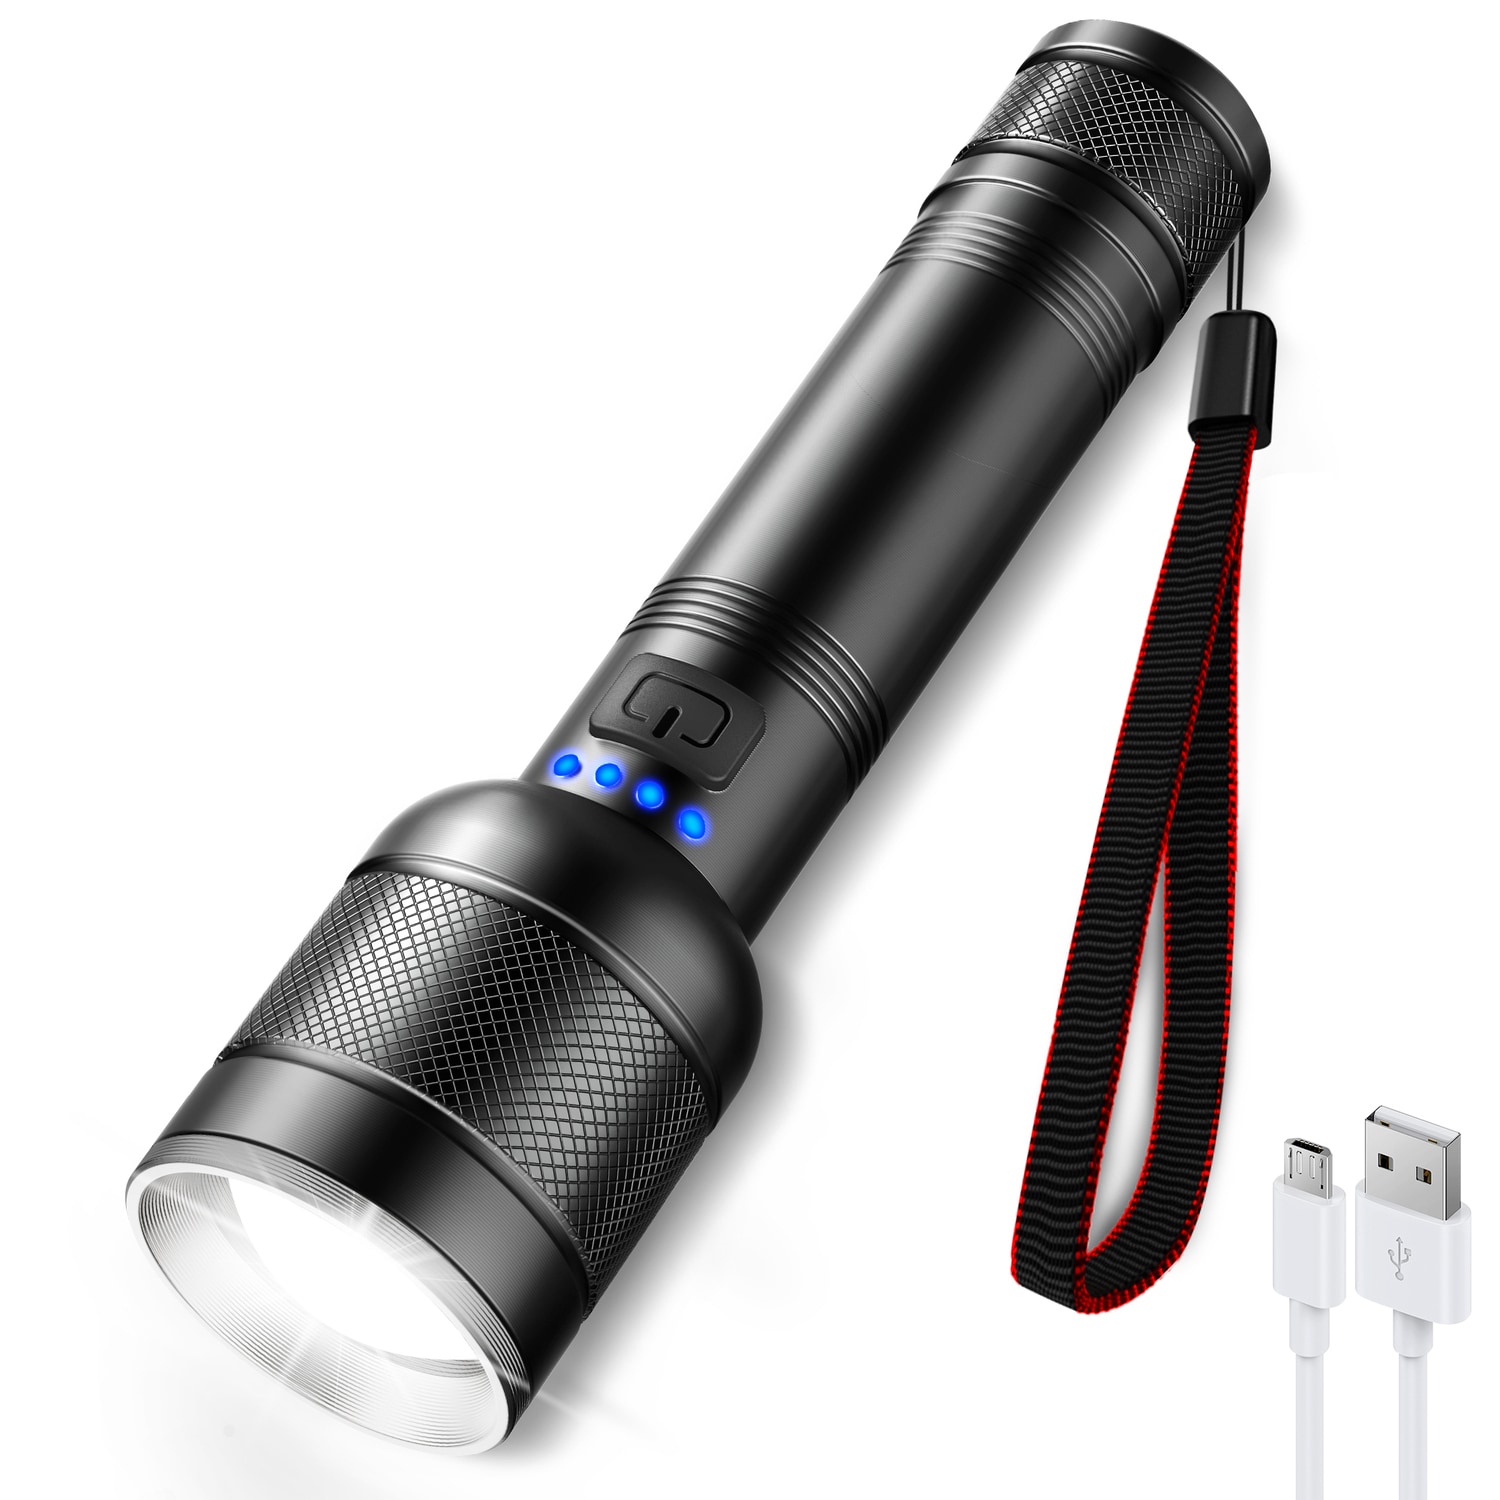 Dorcy International Ultra HD 1000-Lumen 4 Modes LED Rechargeable Flashlight  (Lithium Ion (12V) Battery Included) in the Flashlights department at